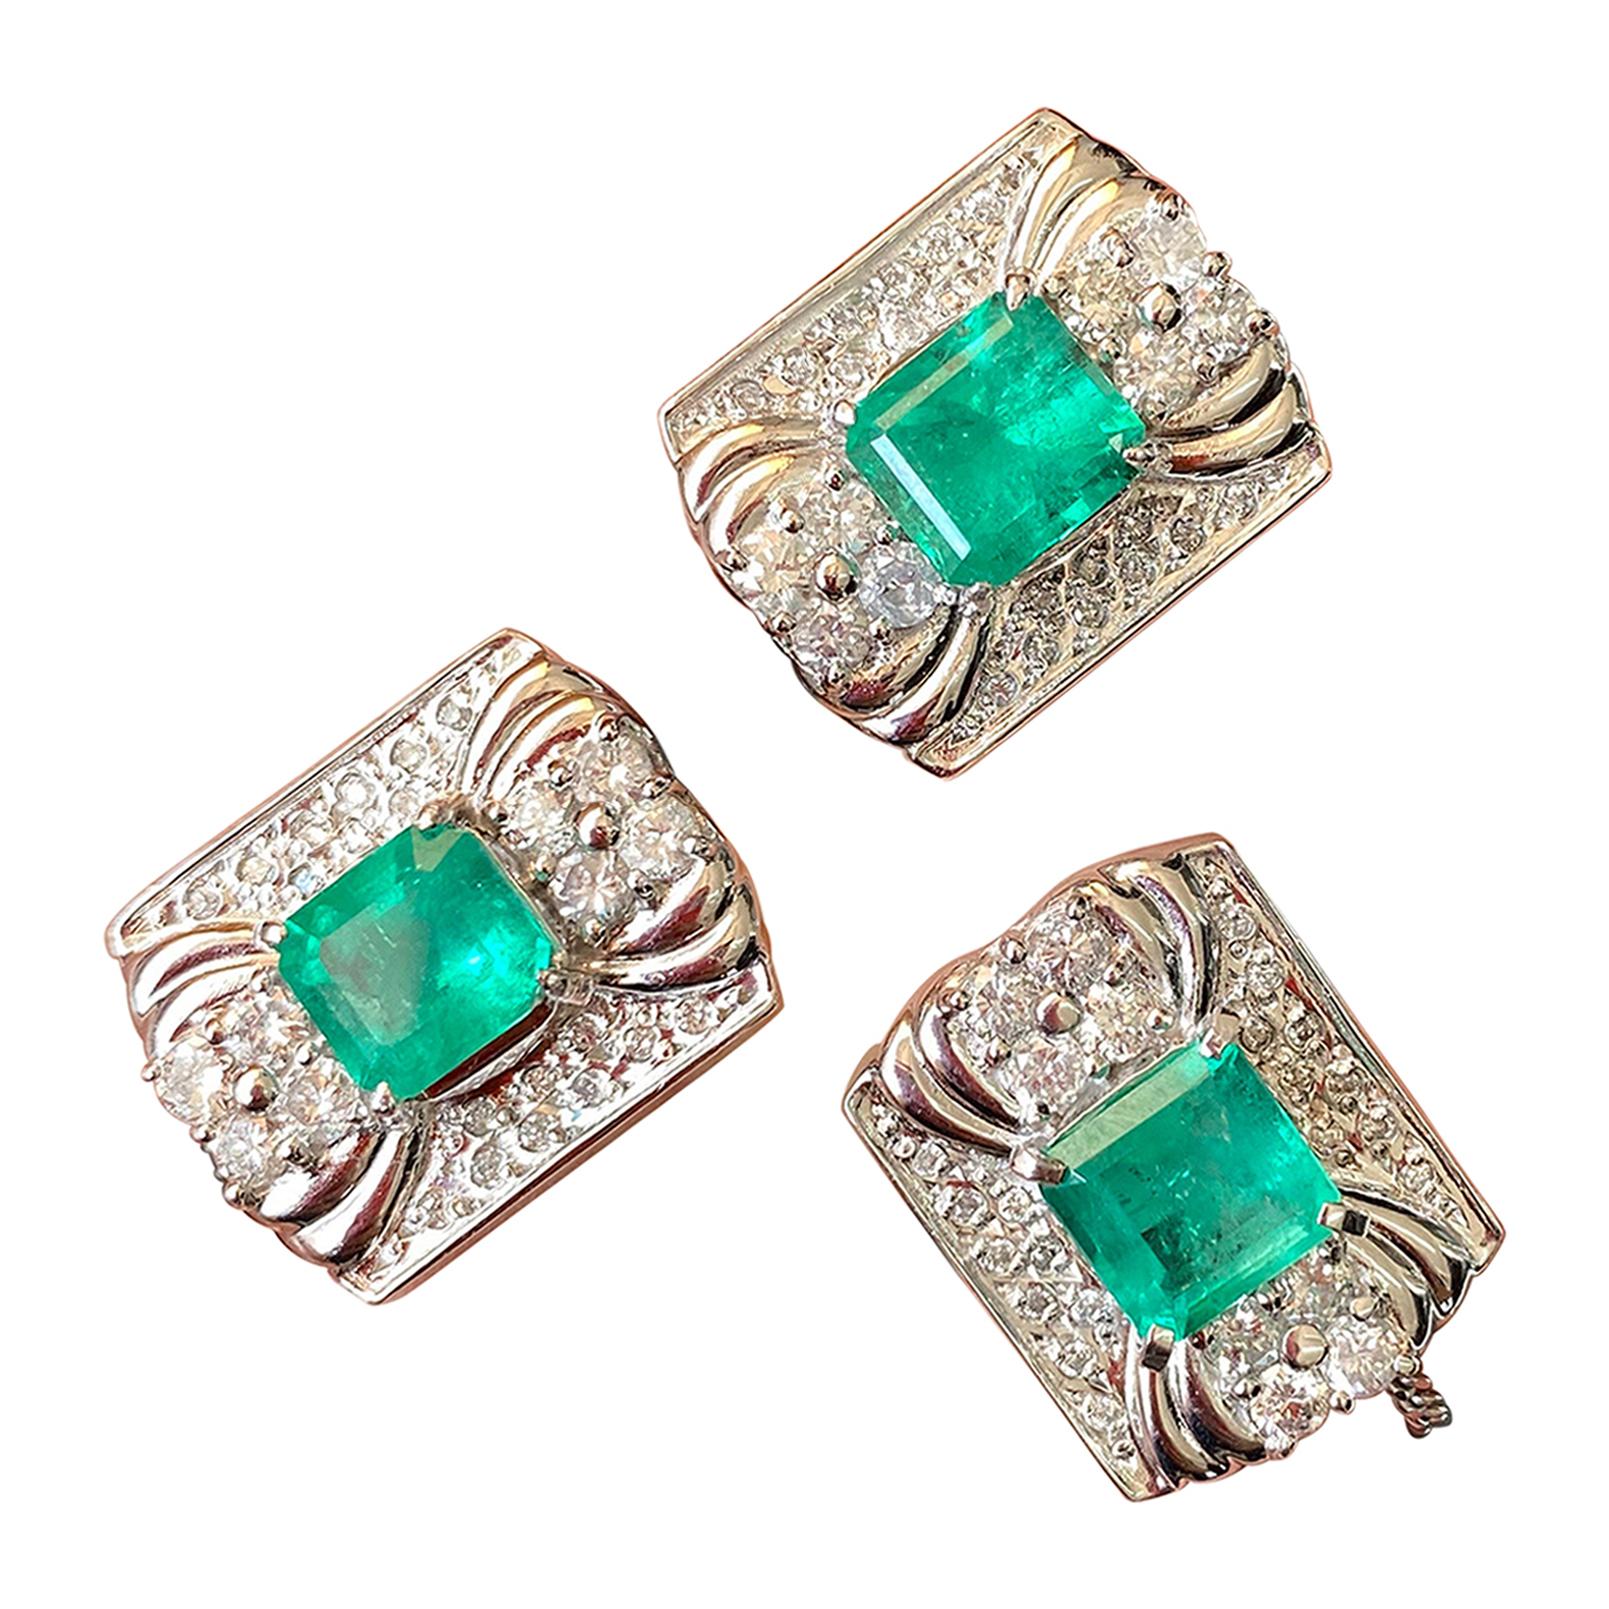 Certified Colombian Emerald and Diamond Cufflinks and Tie Tack in Platinum